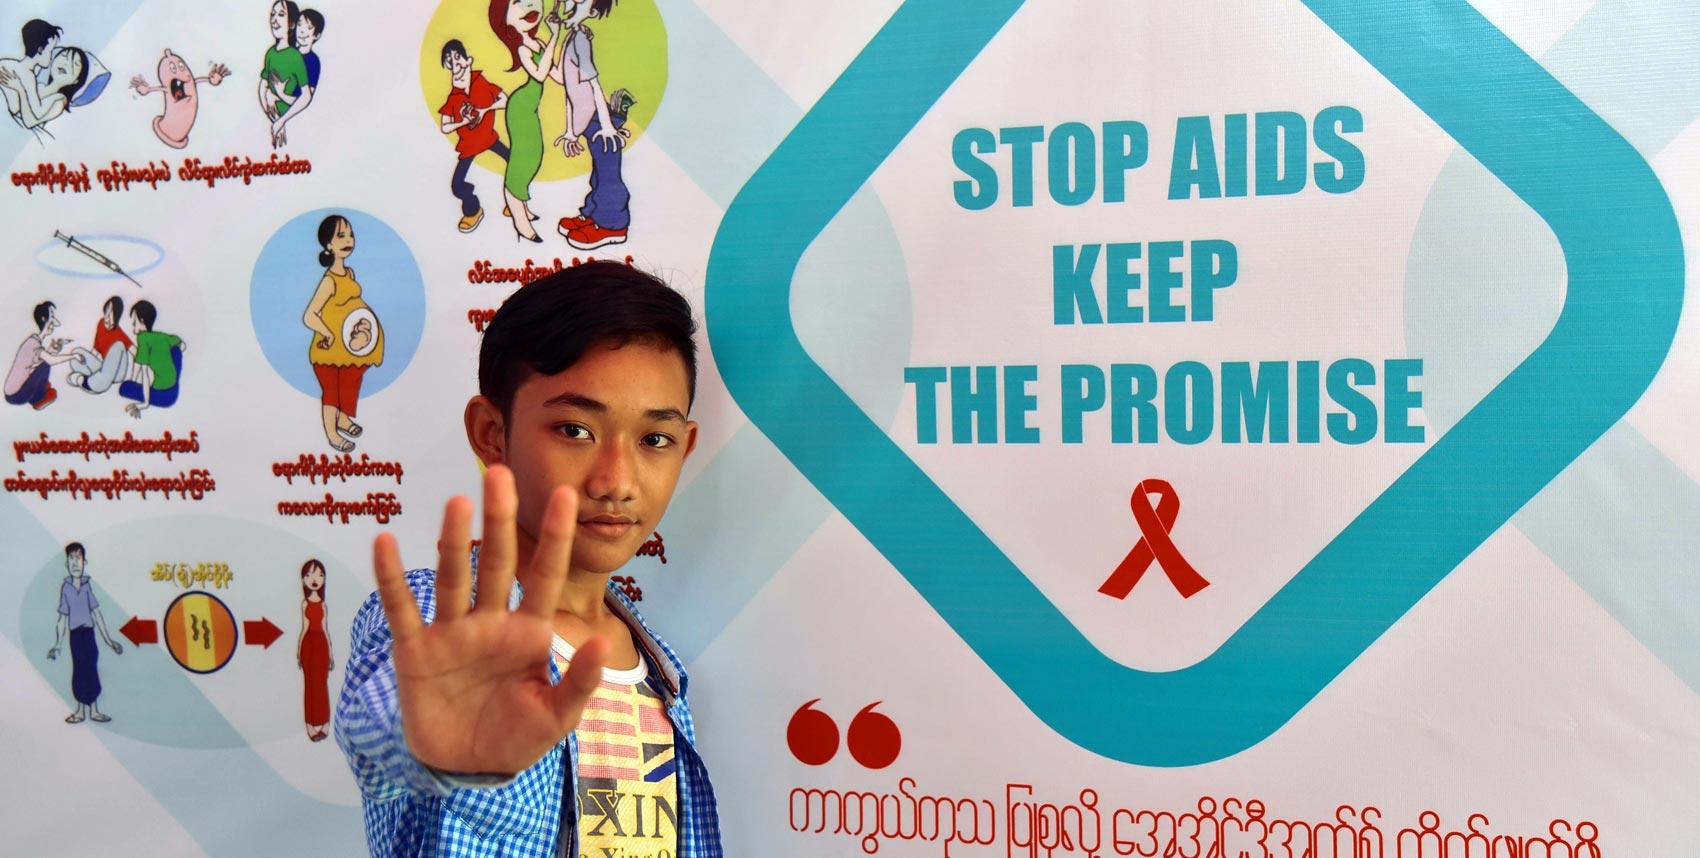 A young man gestures stop in front of a poster that says ‘Stop AIDS Keep the Promise’